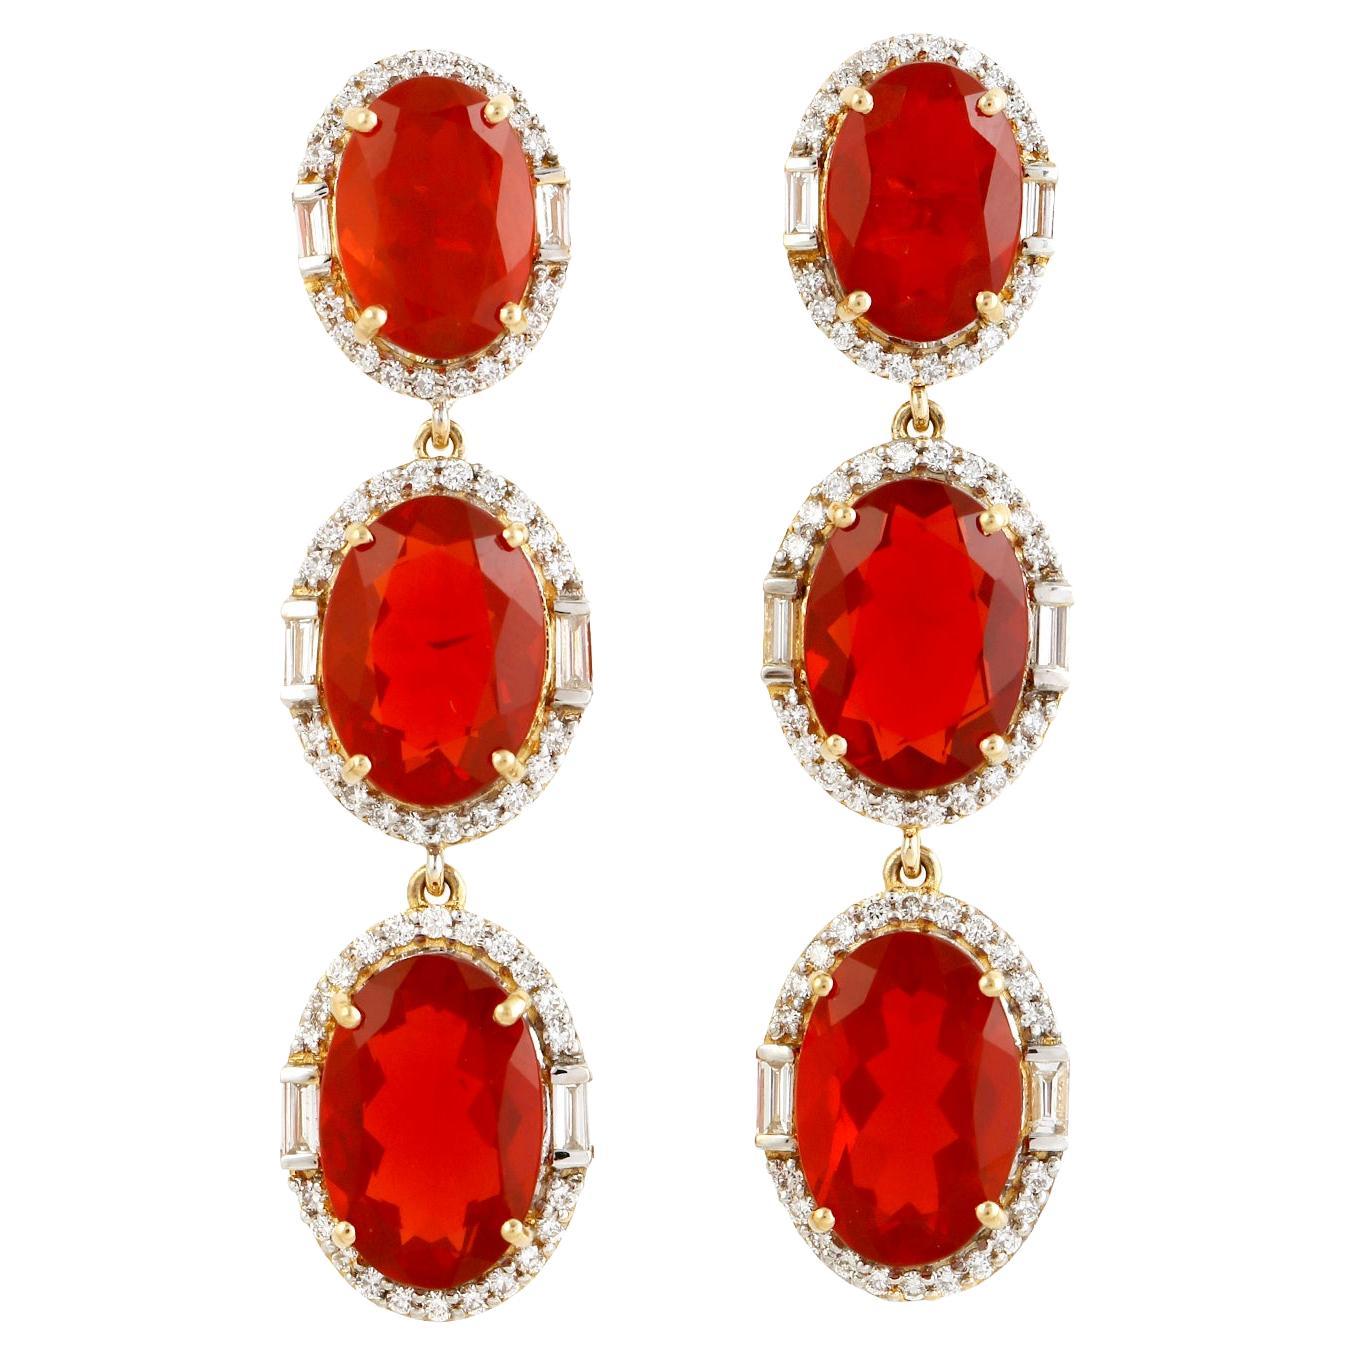 Three Tier Fire Opal Earrings With Pave Diamonds In 18k yellow Gold